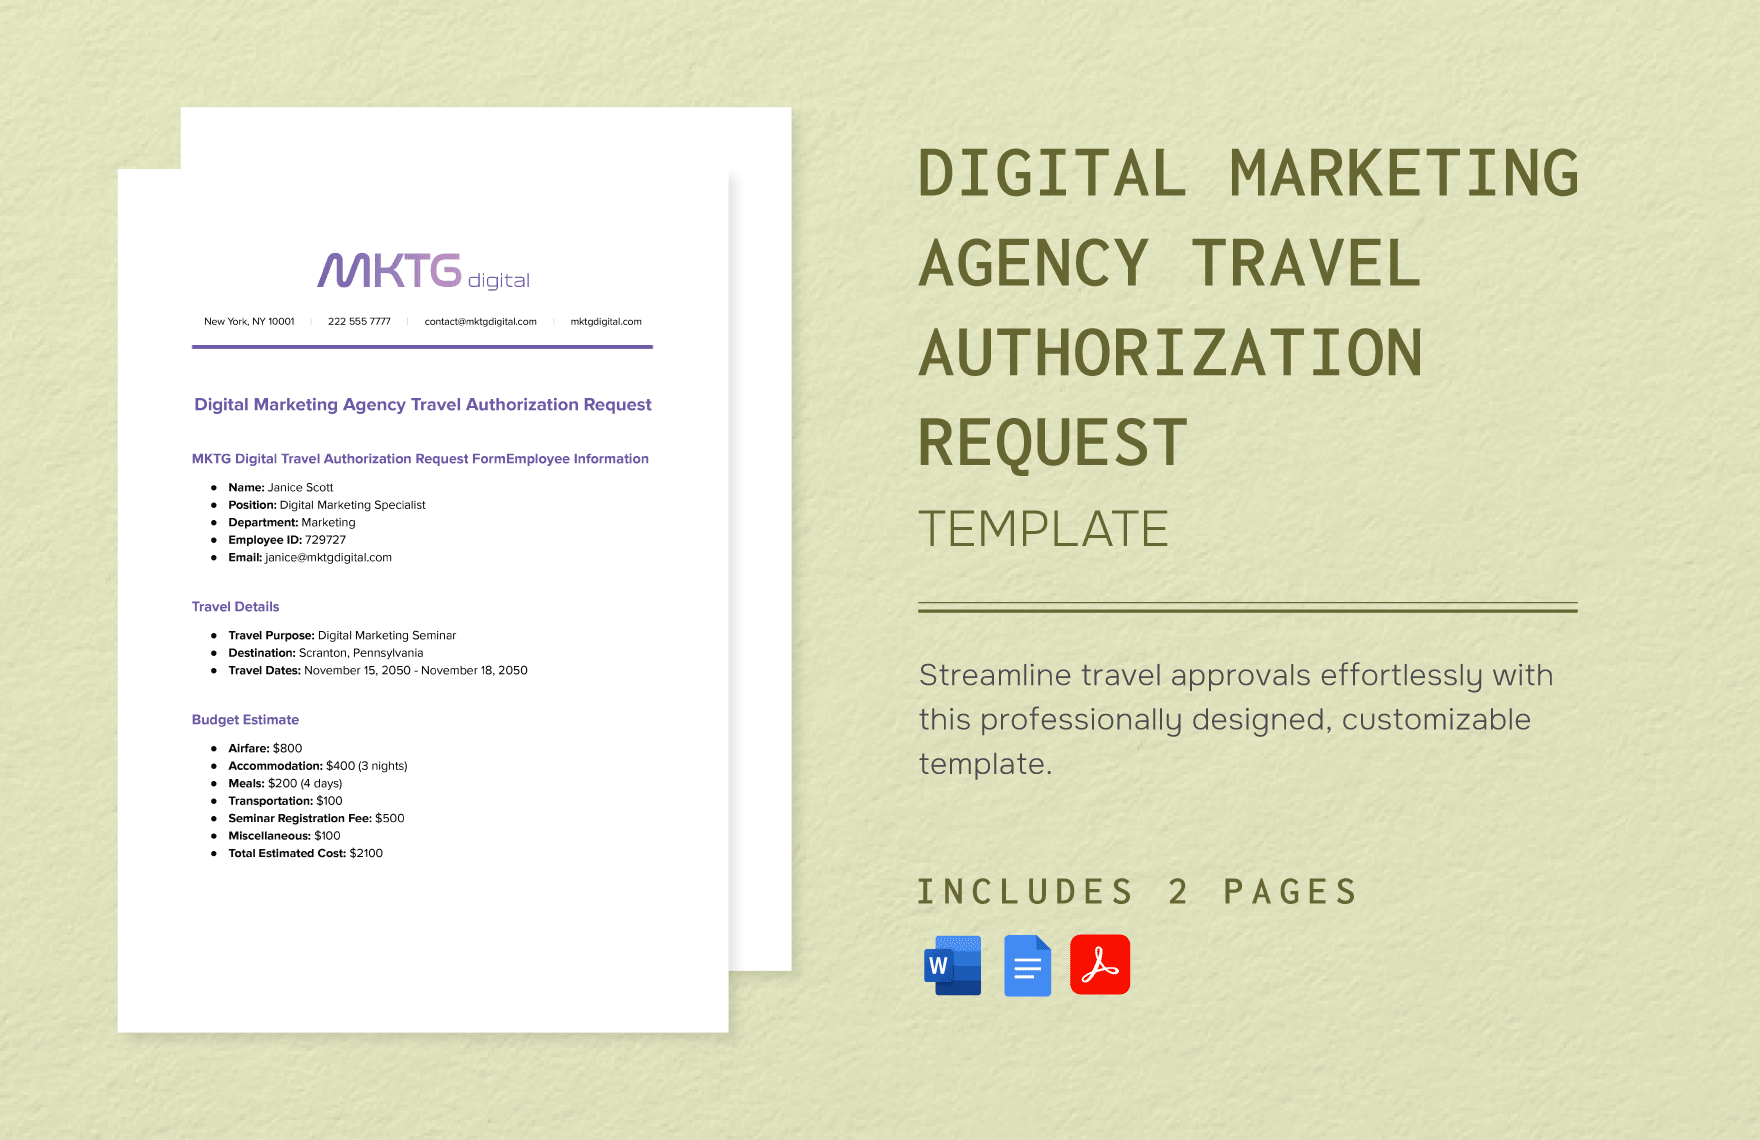 Digital Marketing Agency Travel Authorization Request Template